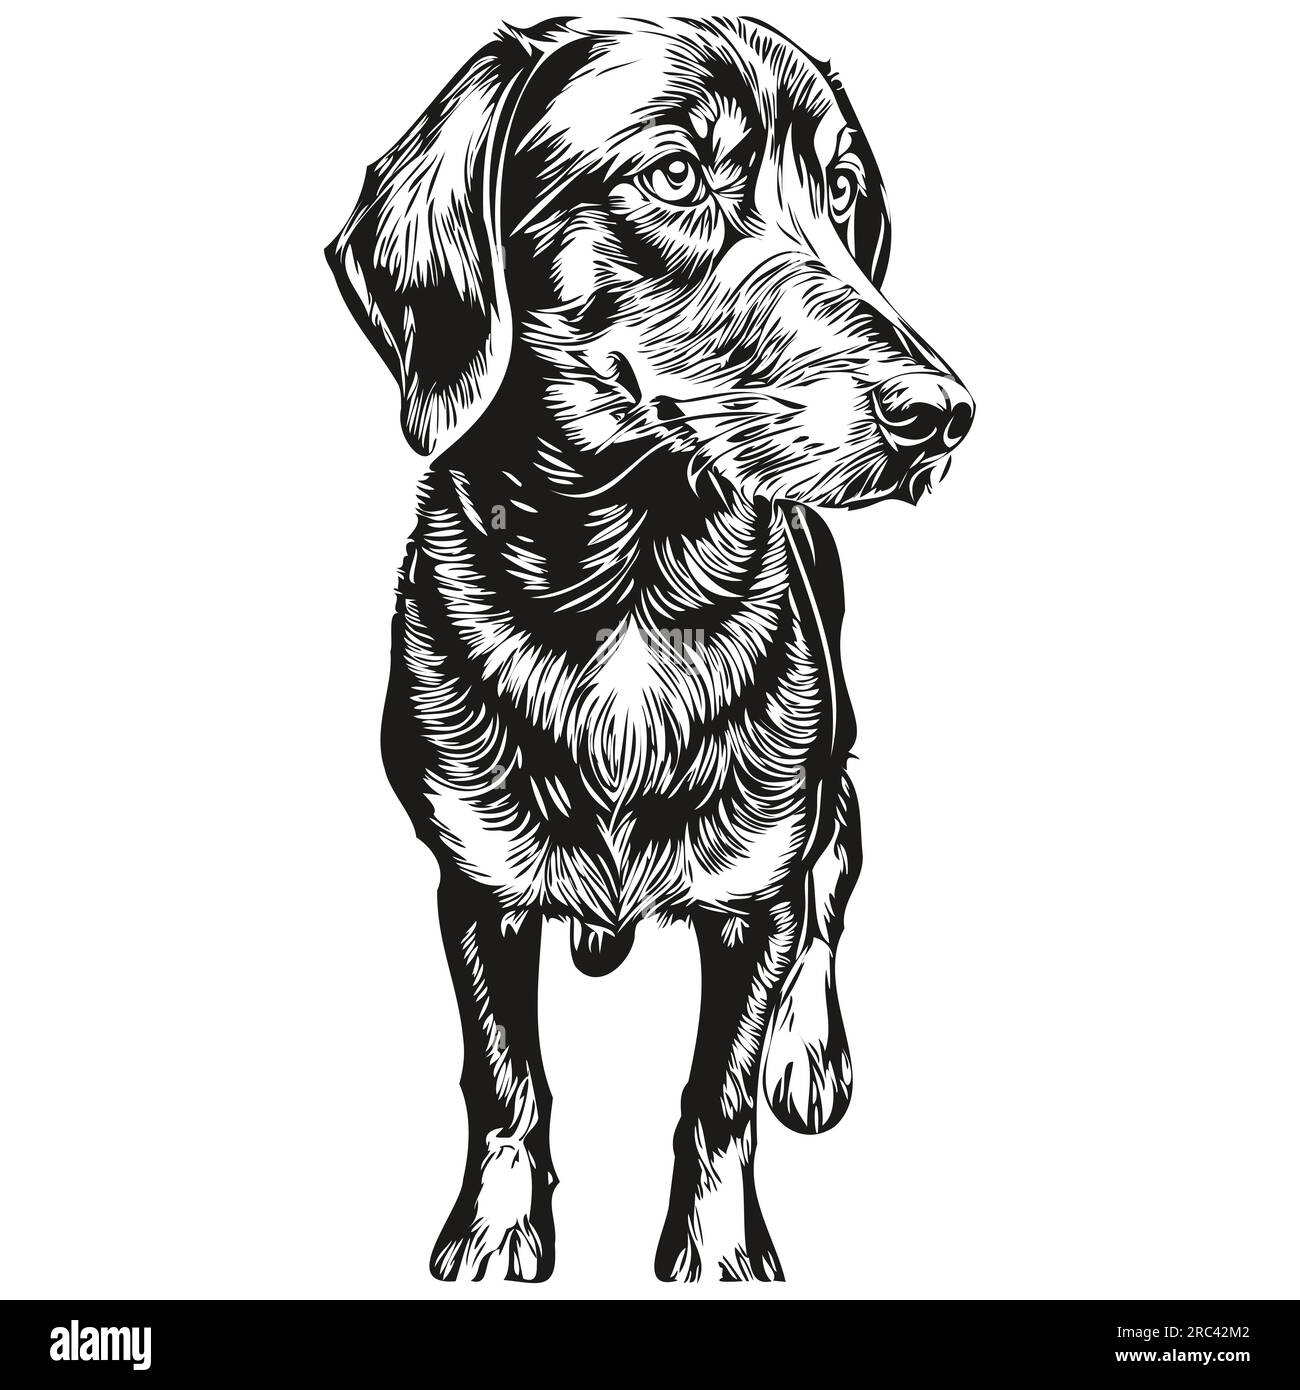 Black and Tan Coonhound dog pet sketch illustration, black and white engraving vector sketch drawing Stock Vector